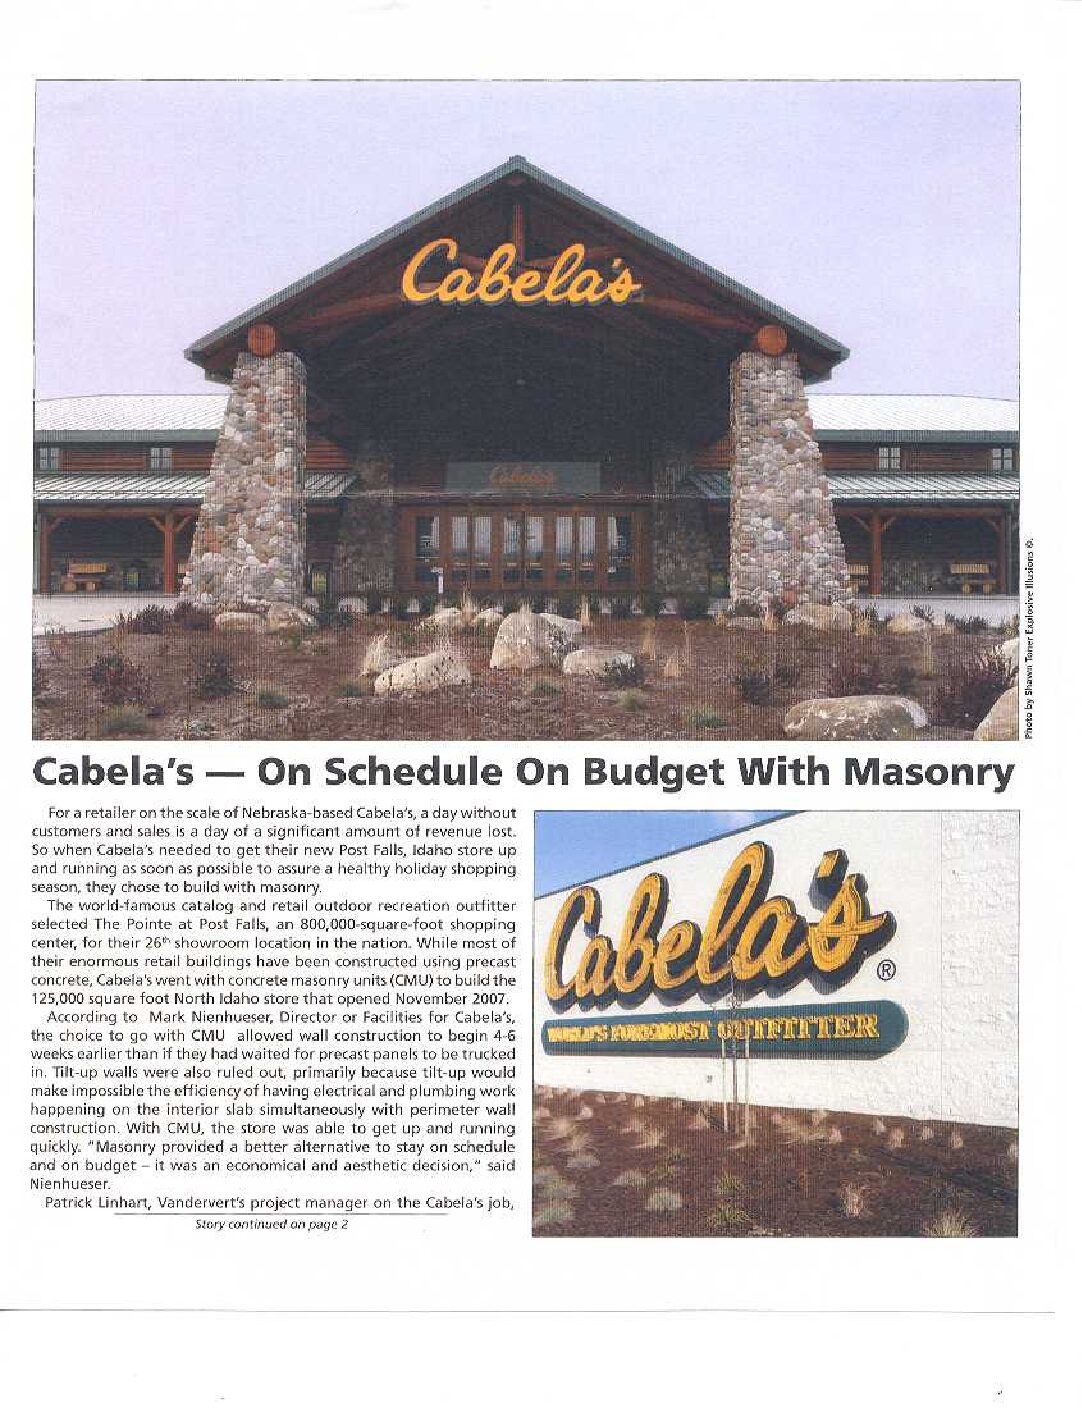 Cabelas on Schedule on Budget with Masonry